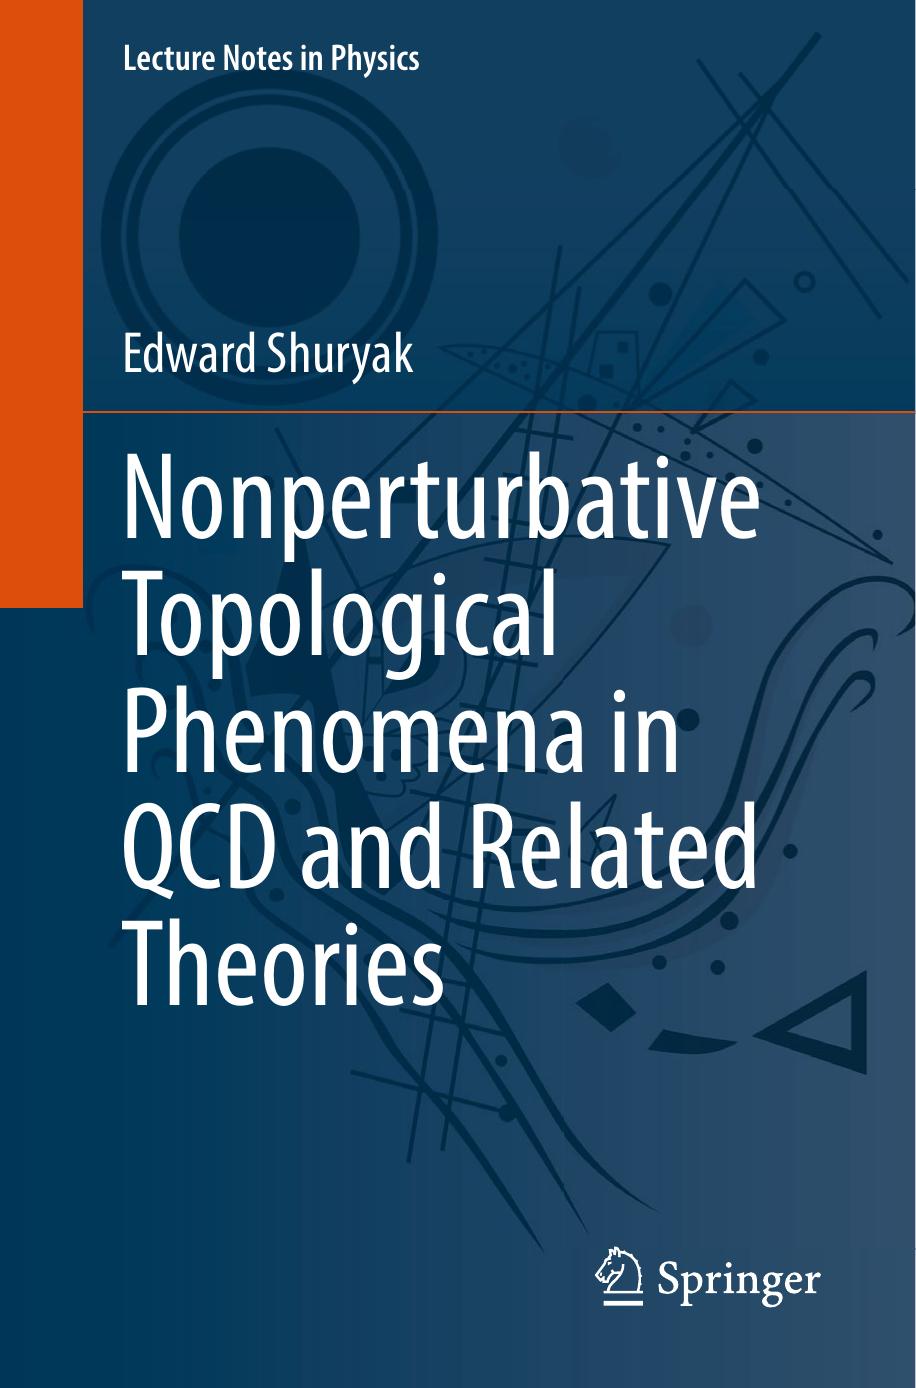 Nonperturbative Topological Phenomena in QCD and Related Theories by Edward Shuryak